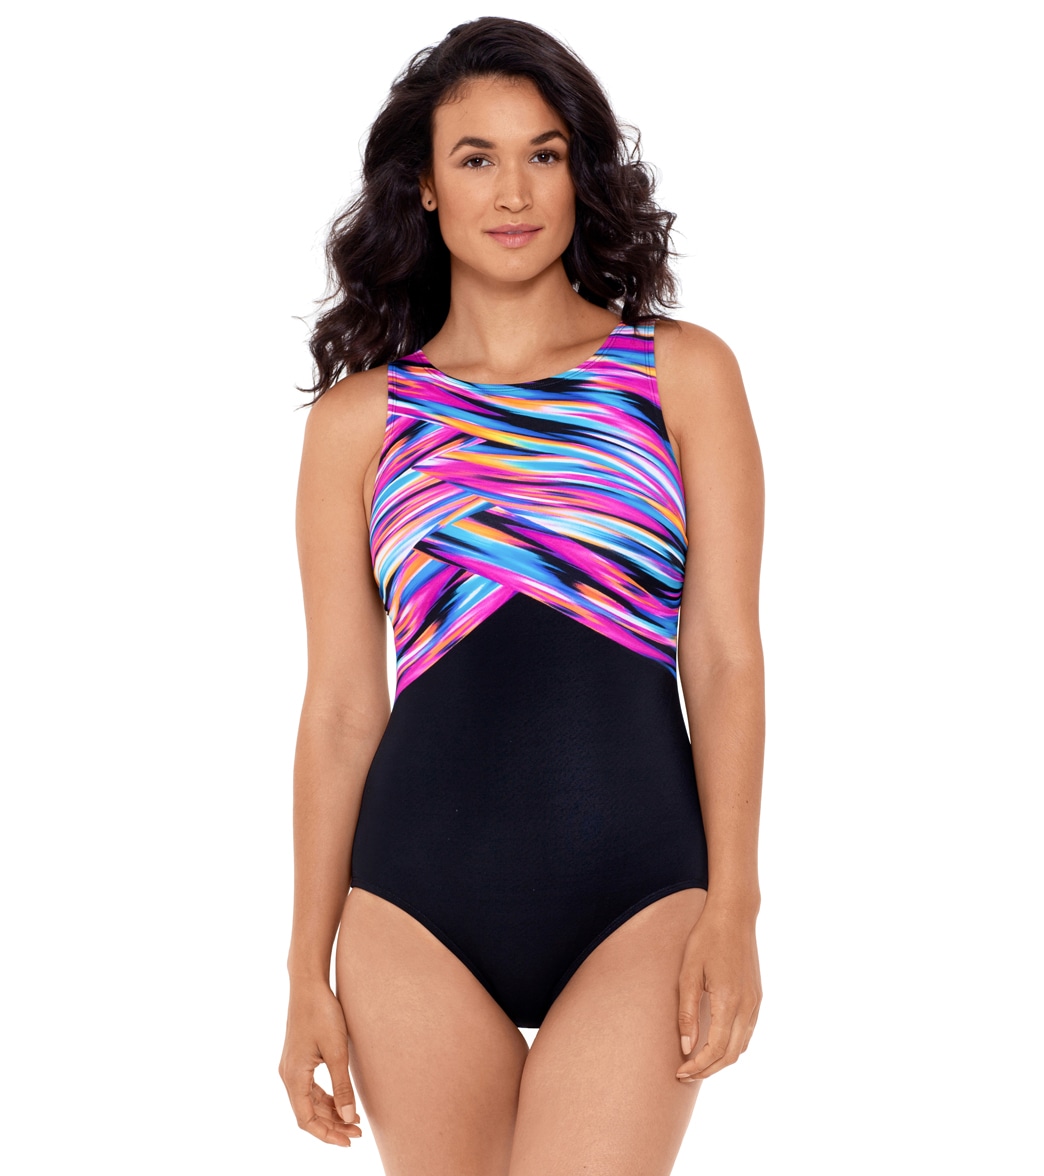 Reebok Women's Wrapped In Perfection High Neck Chlorine Resistant One Piece Swimsuit - Pink/Black 14 - Swimoutlet.com